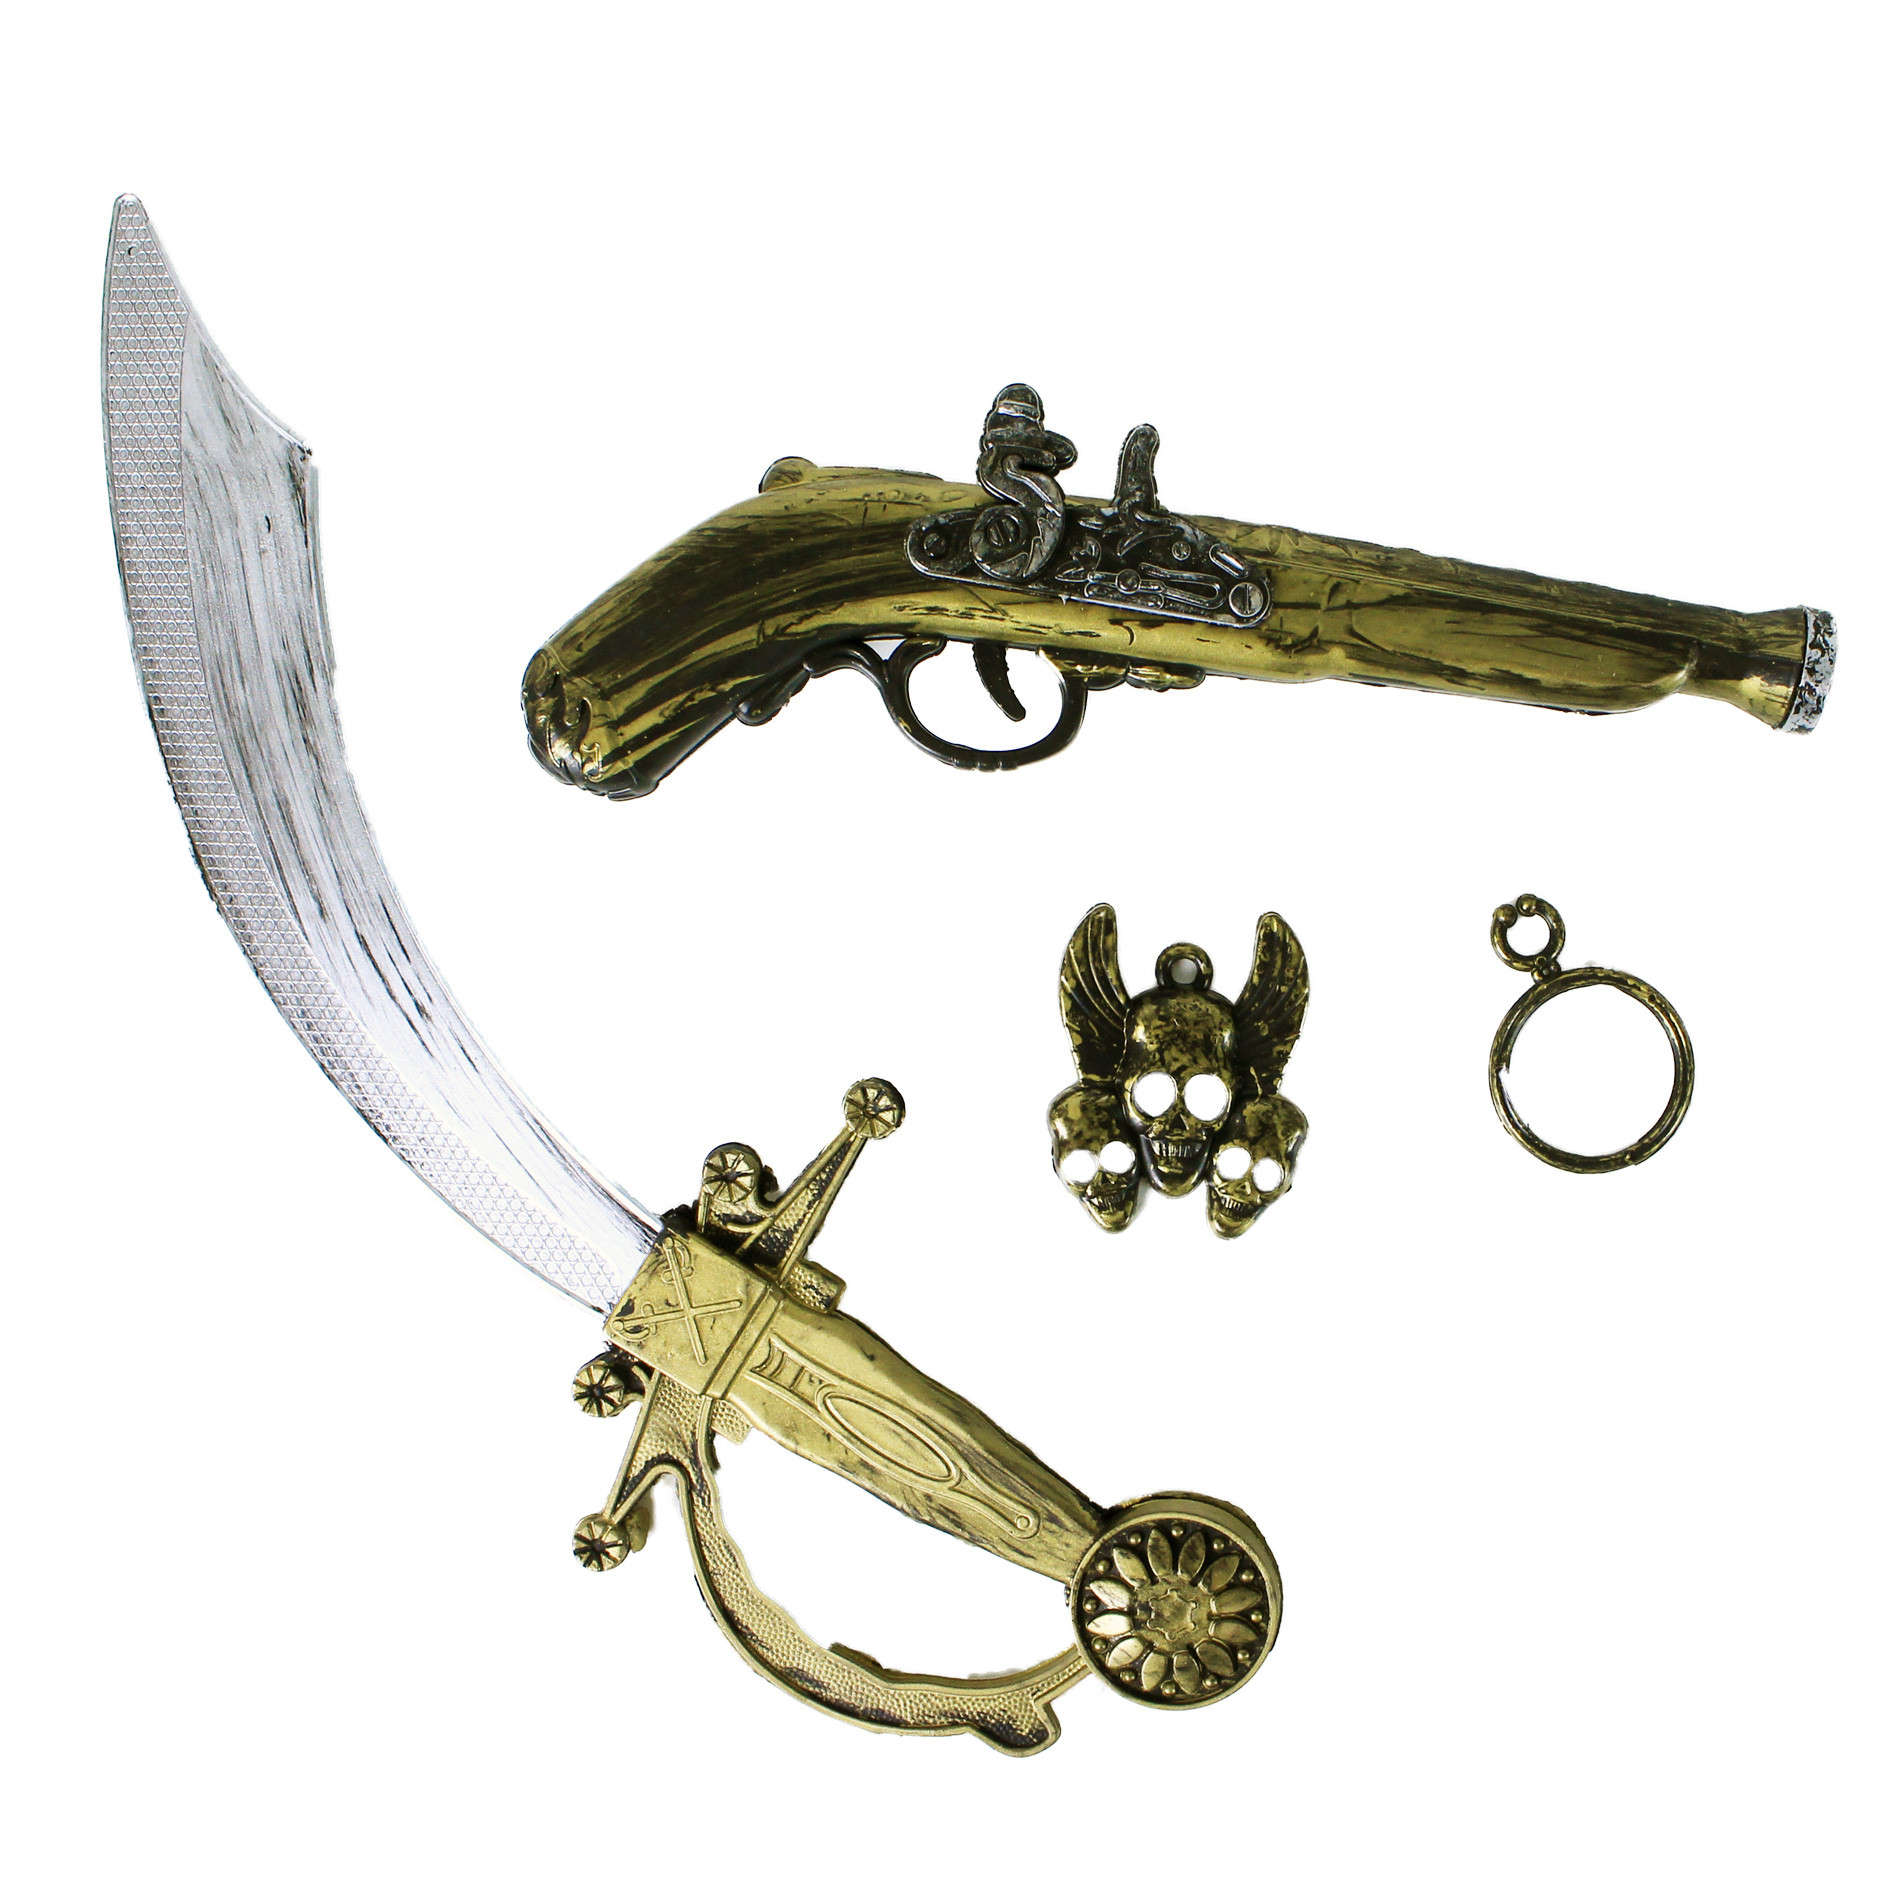 the pirate set of a gun and a sabre